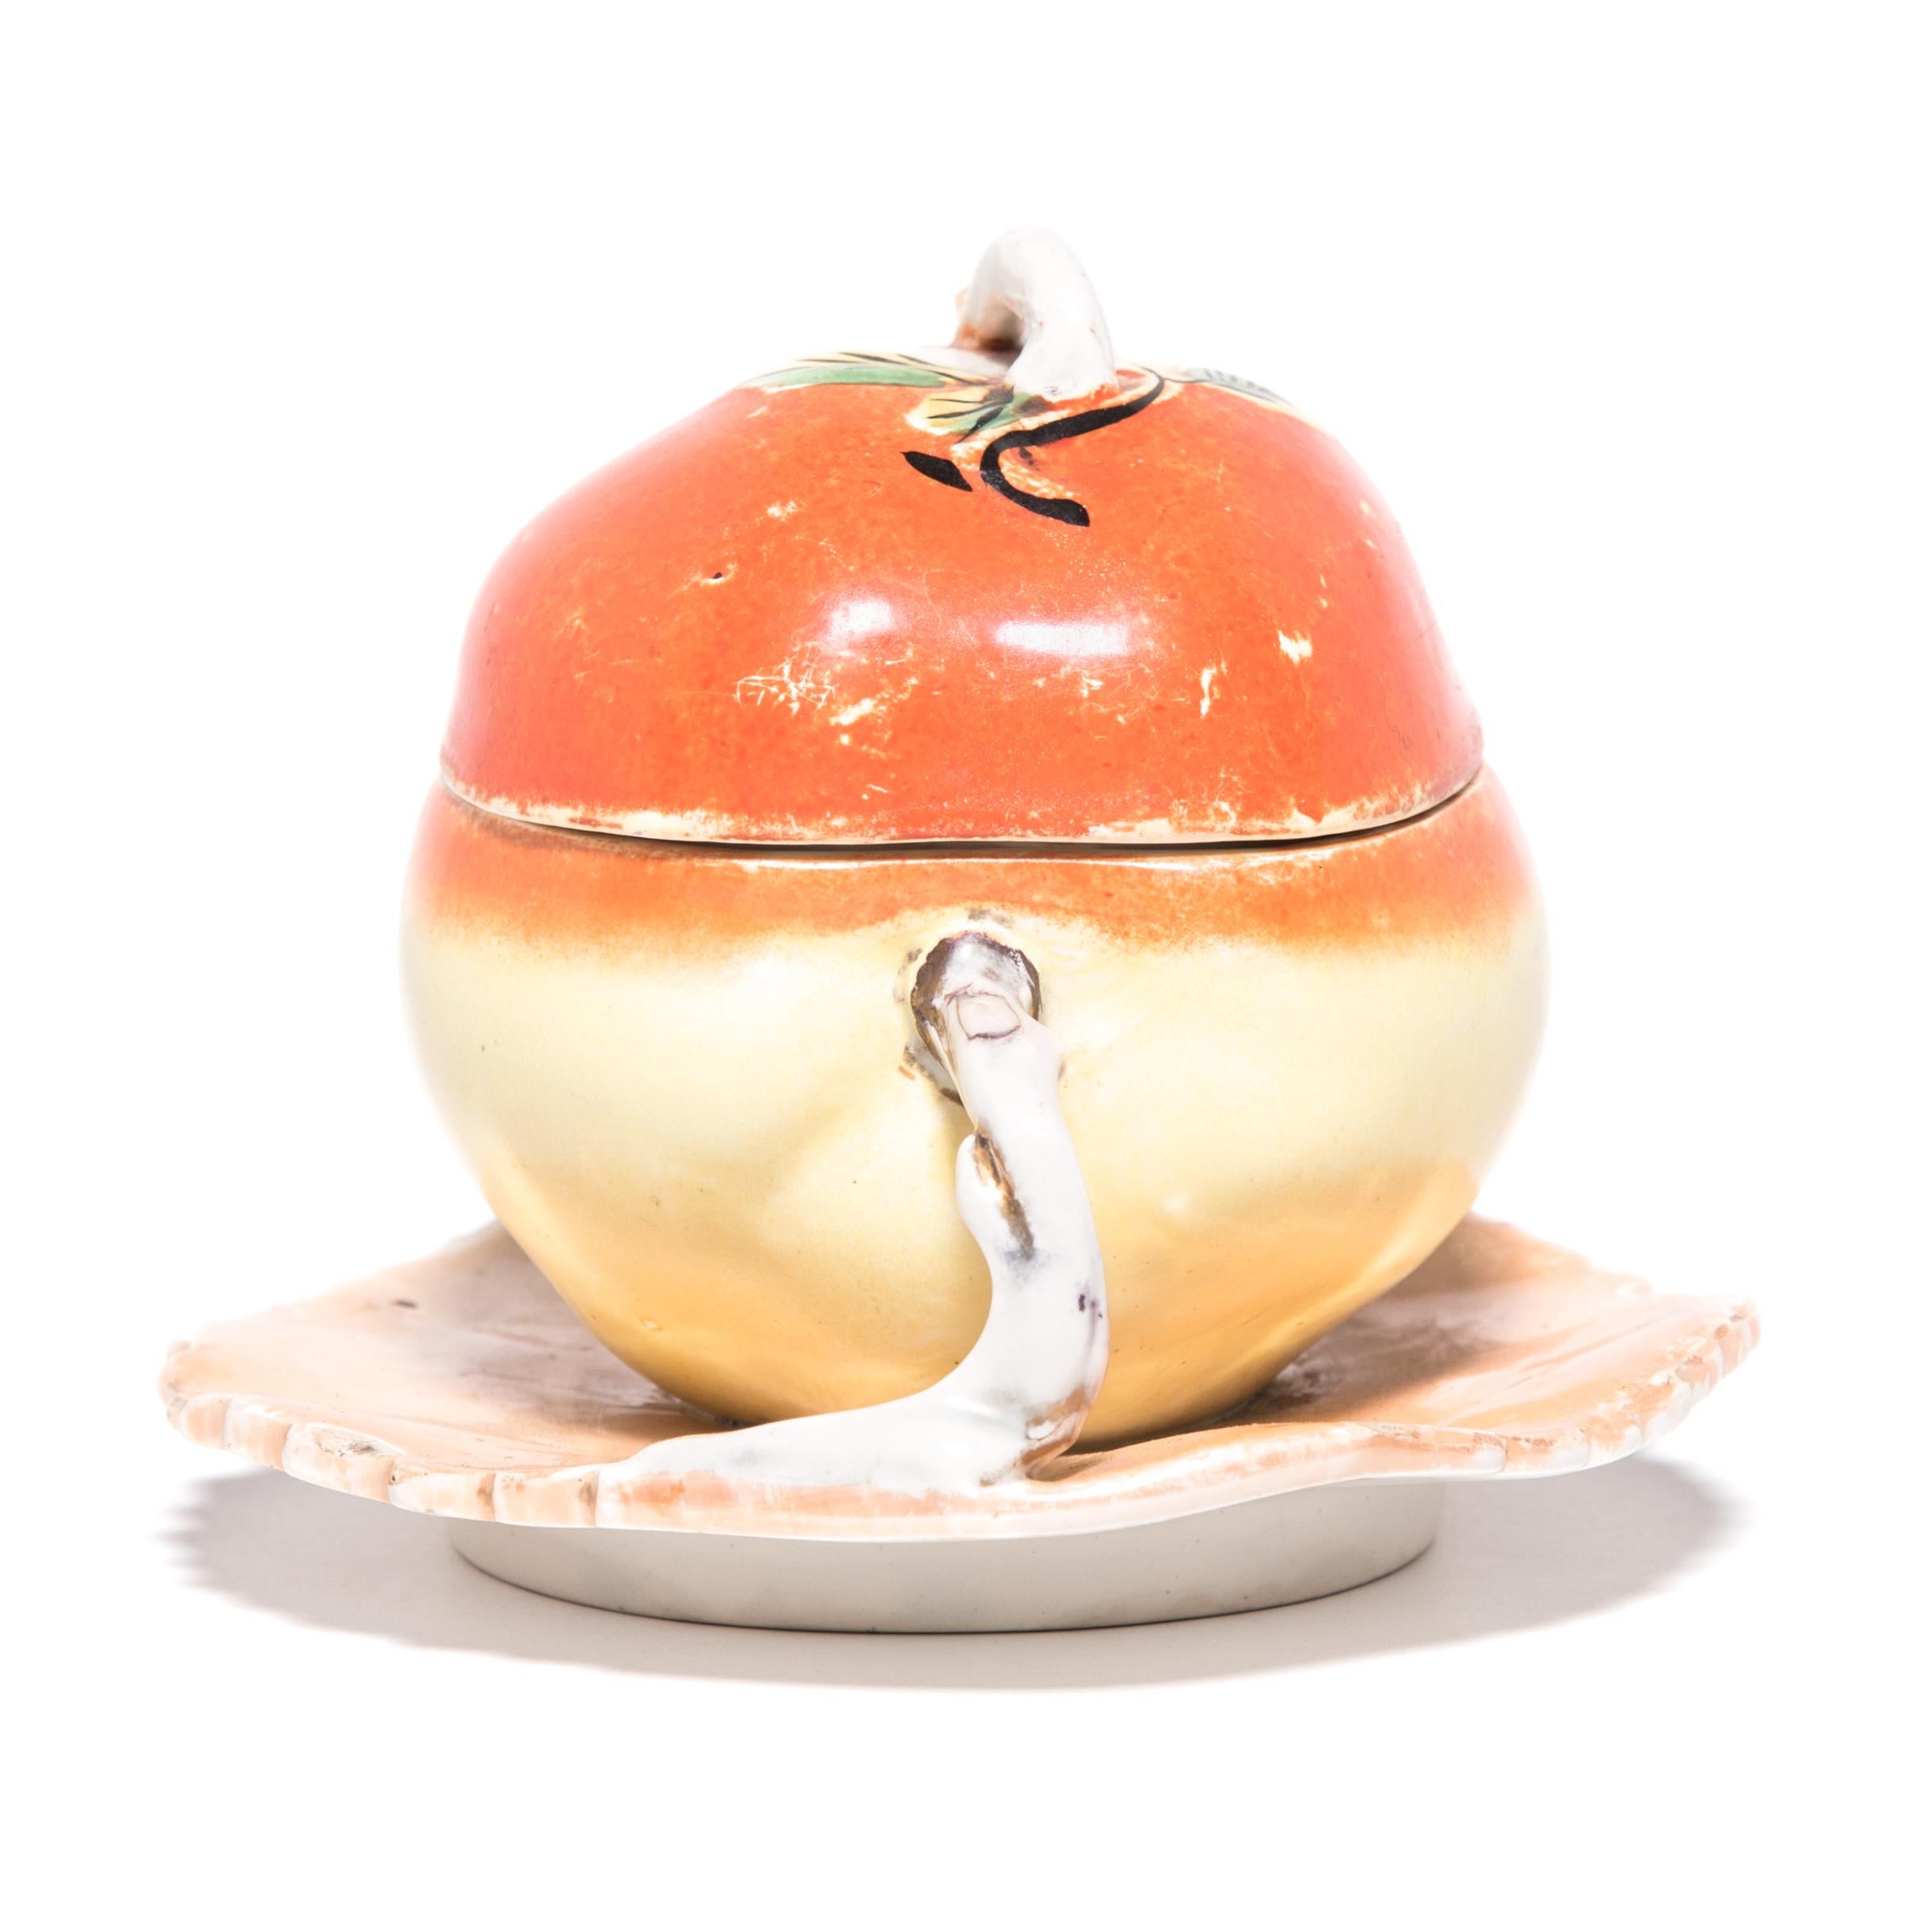 This early 20th century covered porcelain peach container from northern China would have been a charming gift for a warm-weather birthday or wedding. Peaches represent spring, longevity, and marriage.